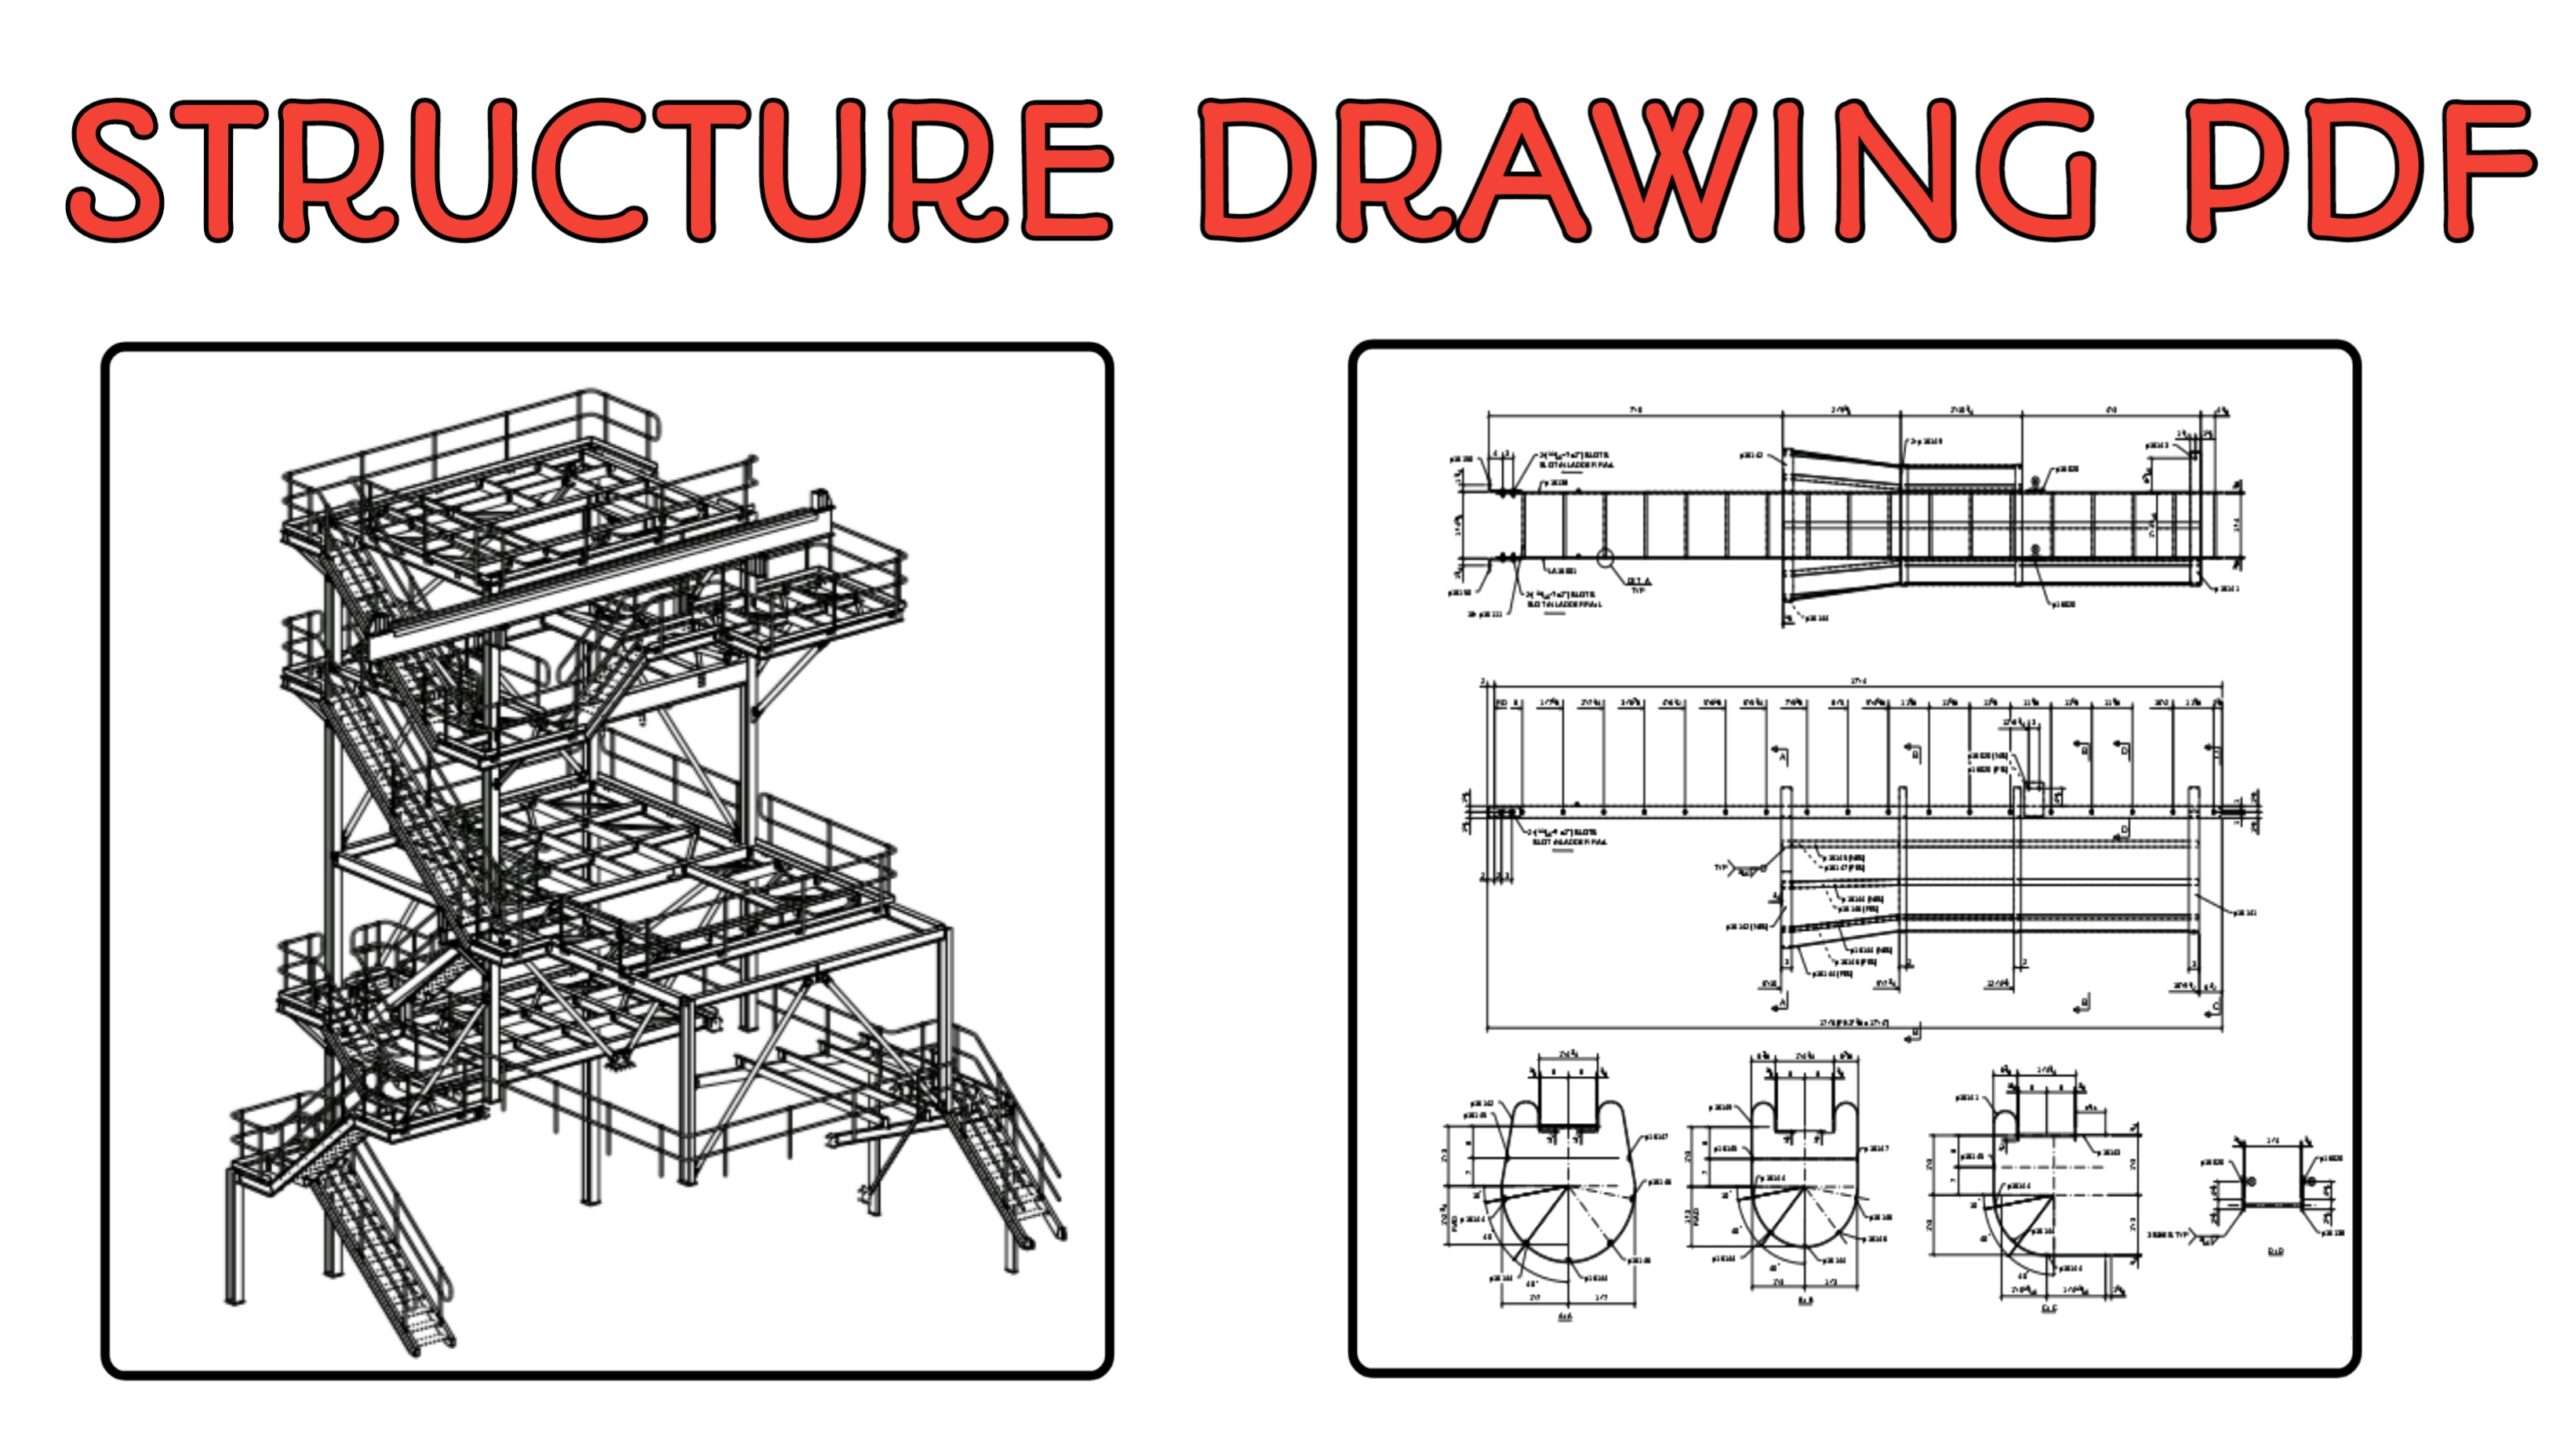 Residential Design (Working Drawings) by john low - Issuu